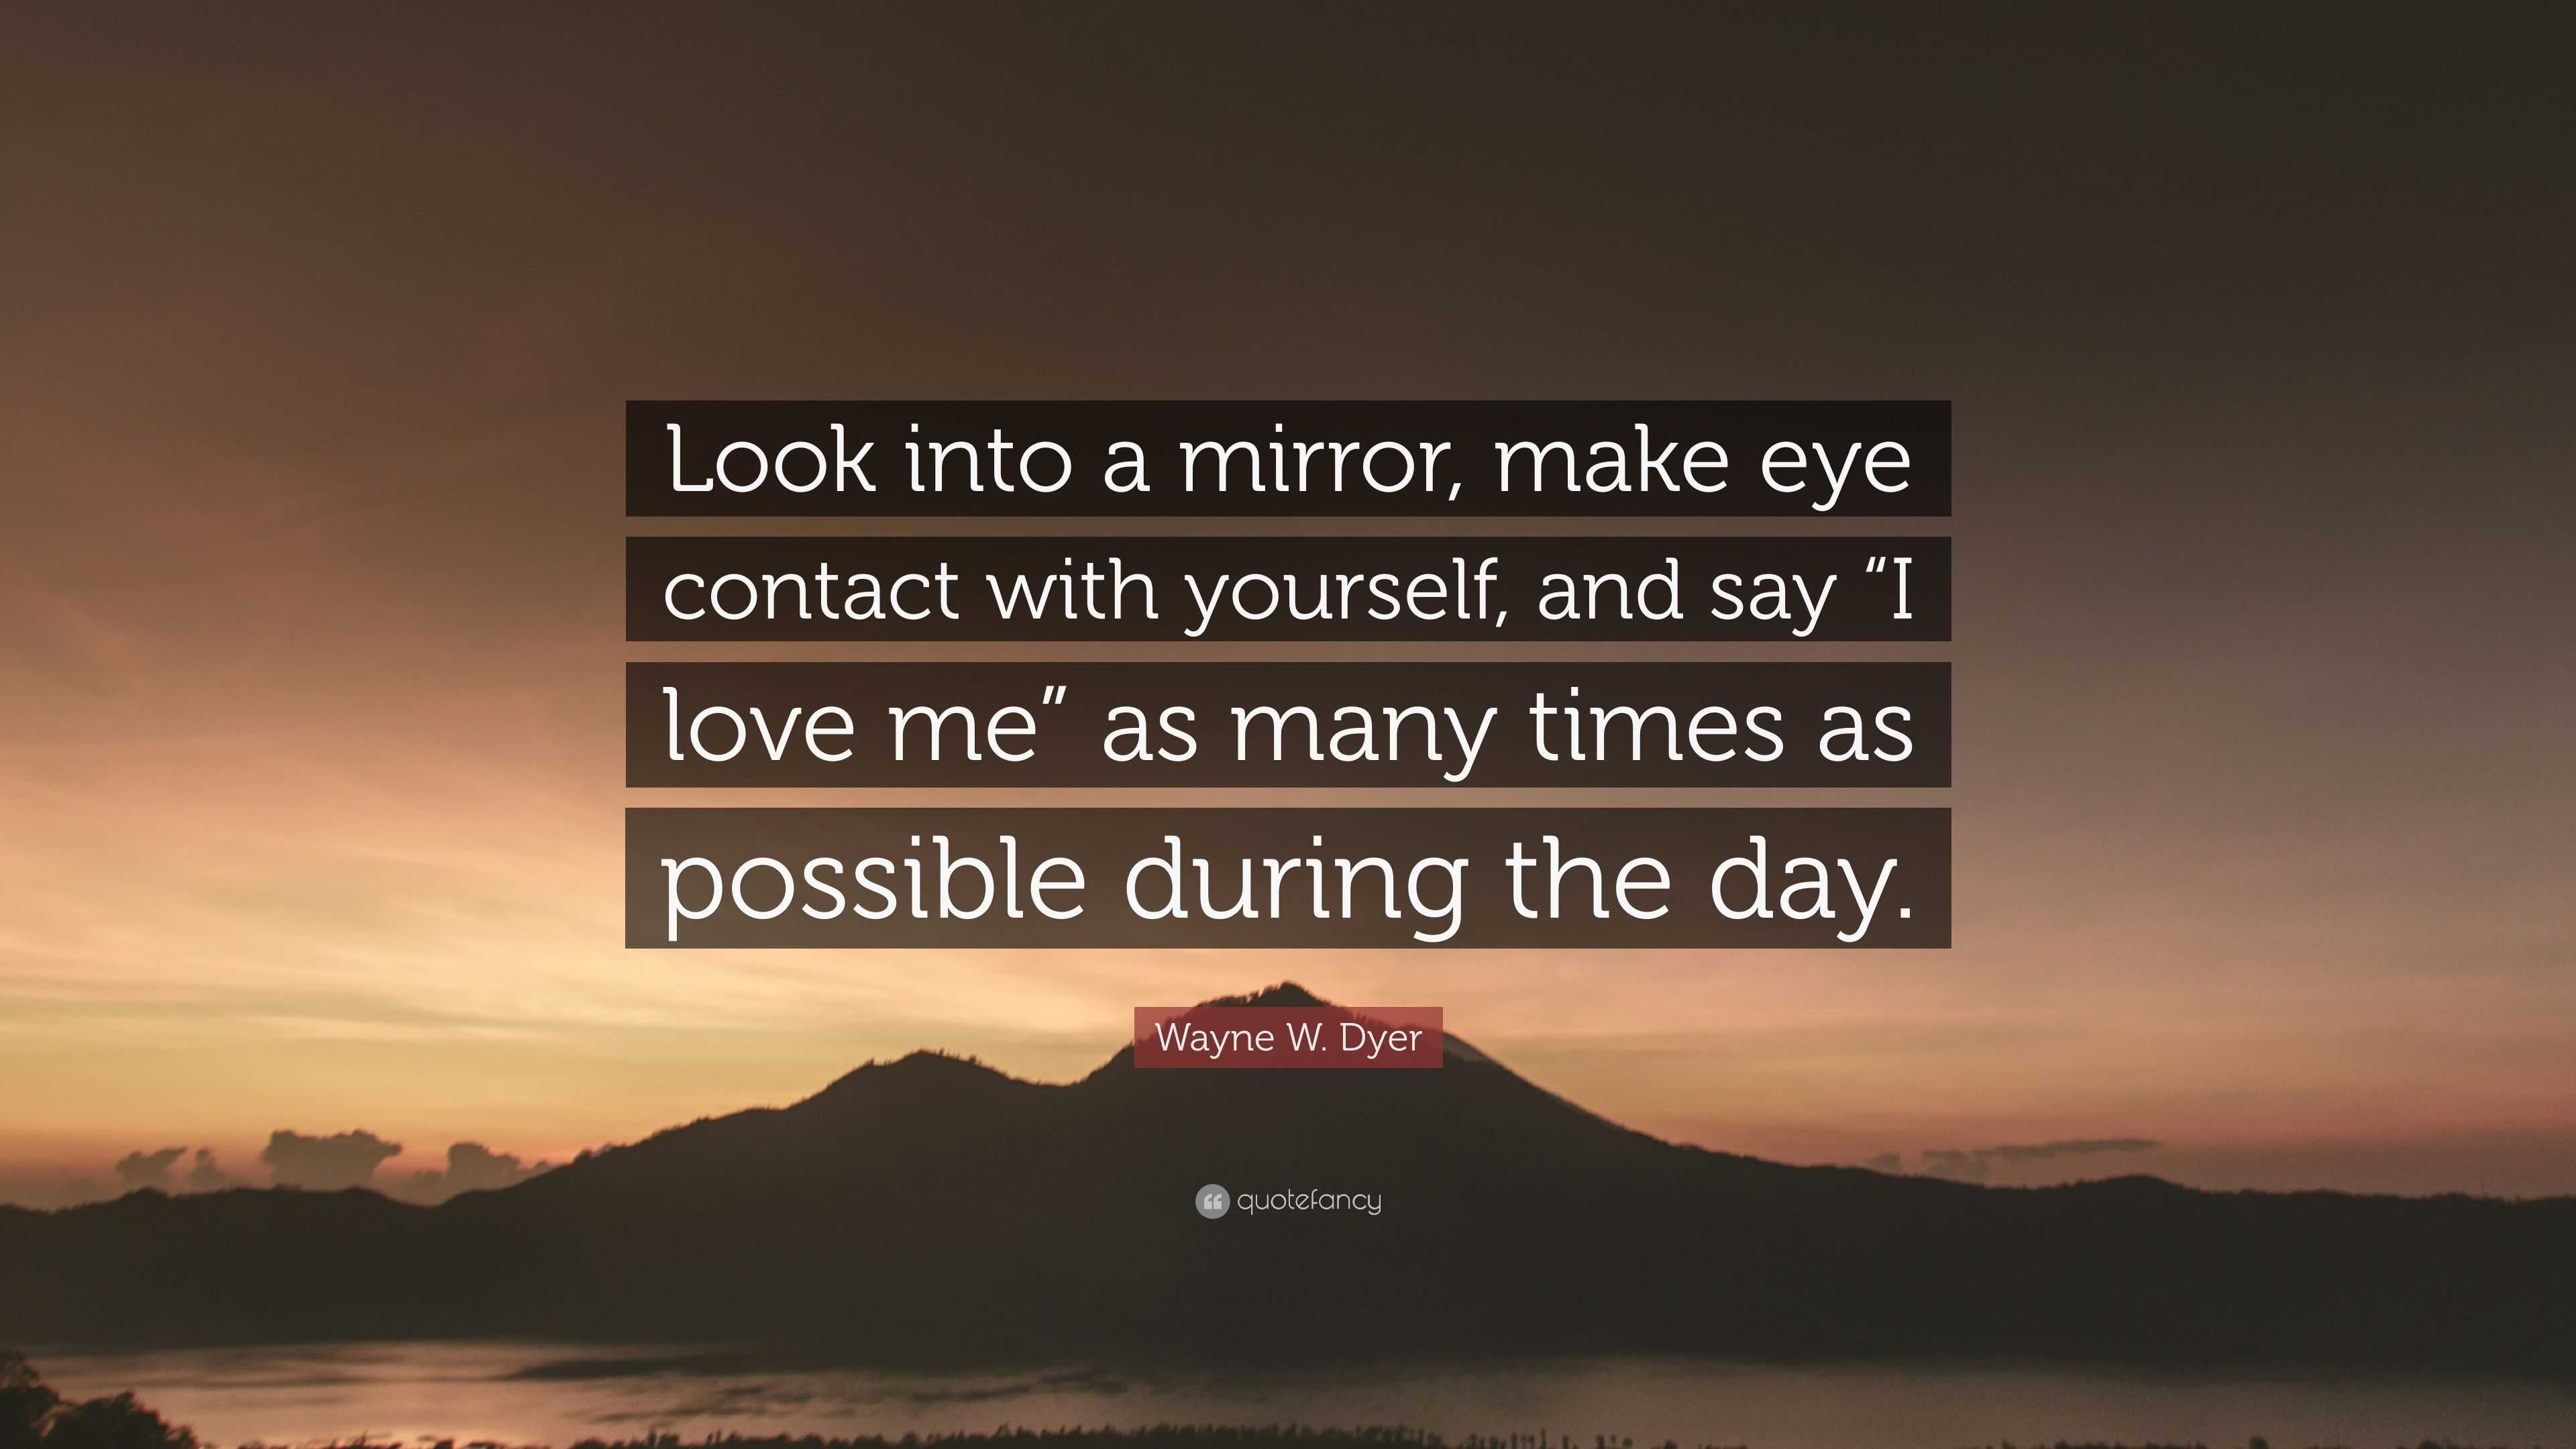 Wayne W Dyer Quote Look Into A Mirror Make Eye Contact With Yourself And Say I